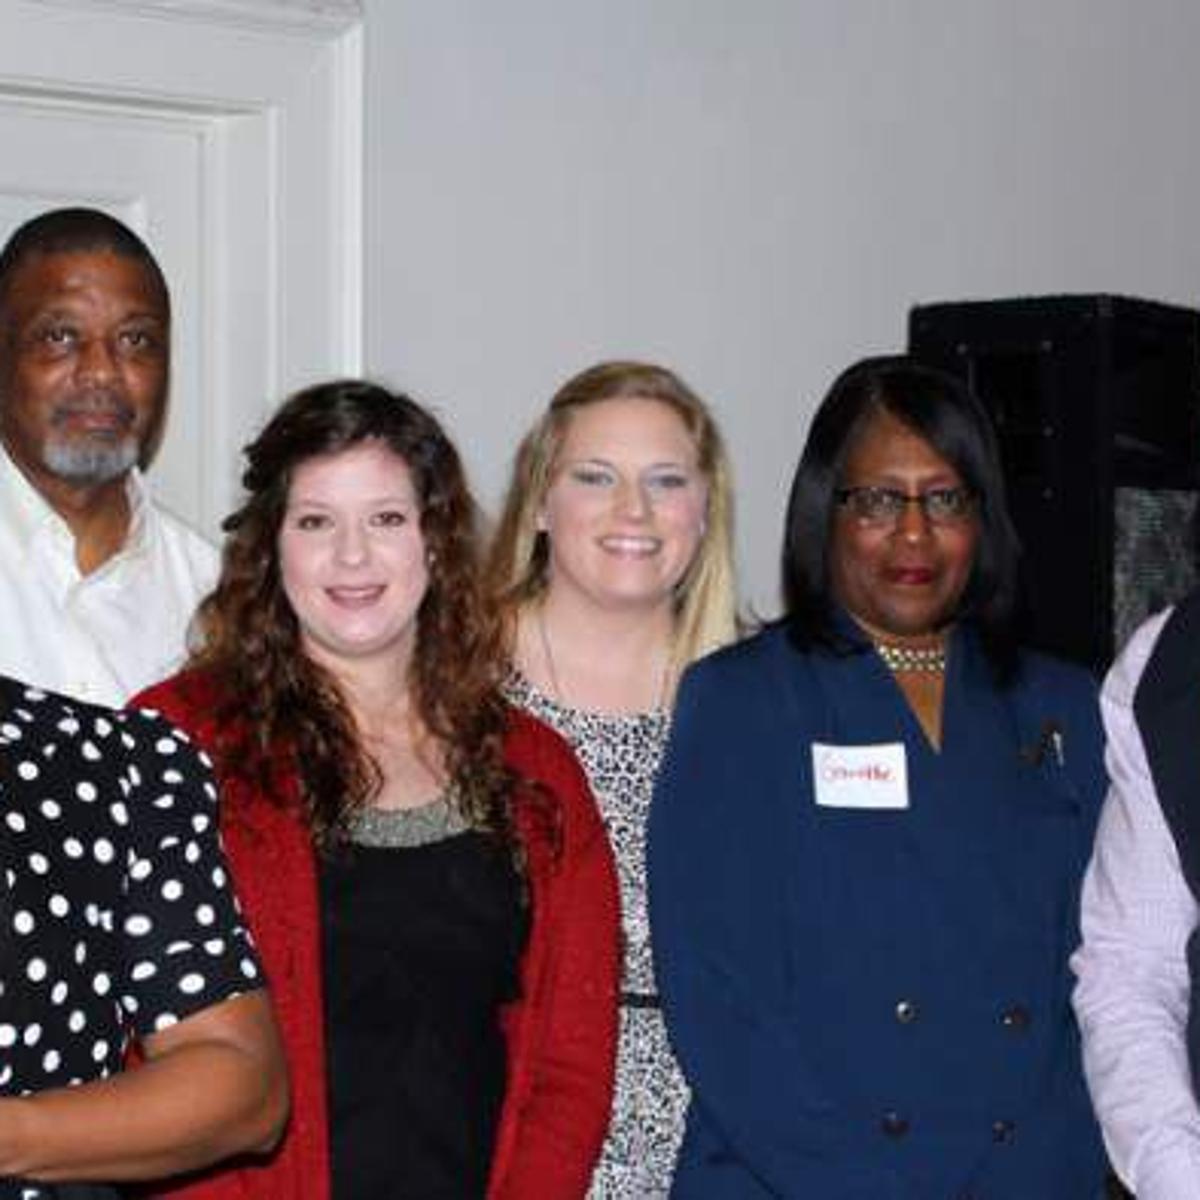 YMCA recognizes staff during annual dinner